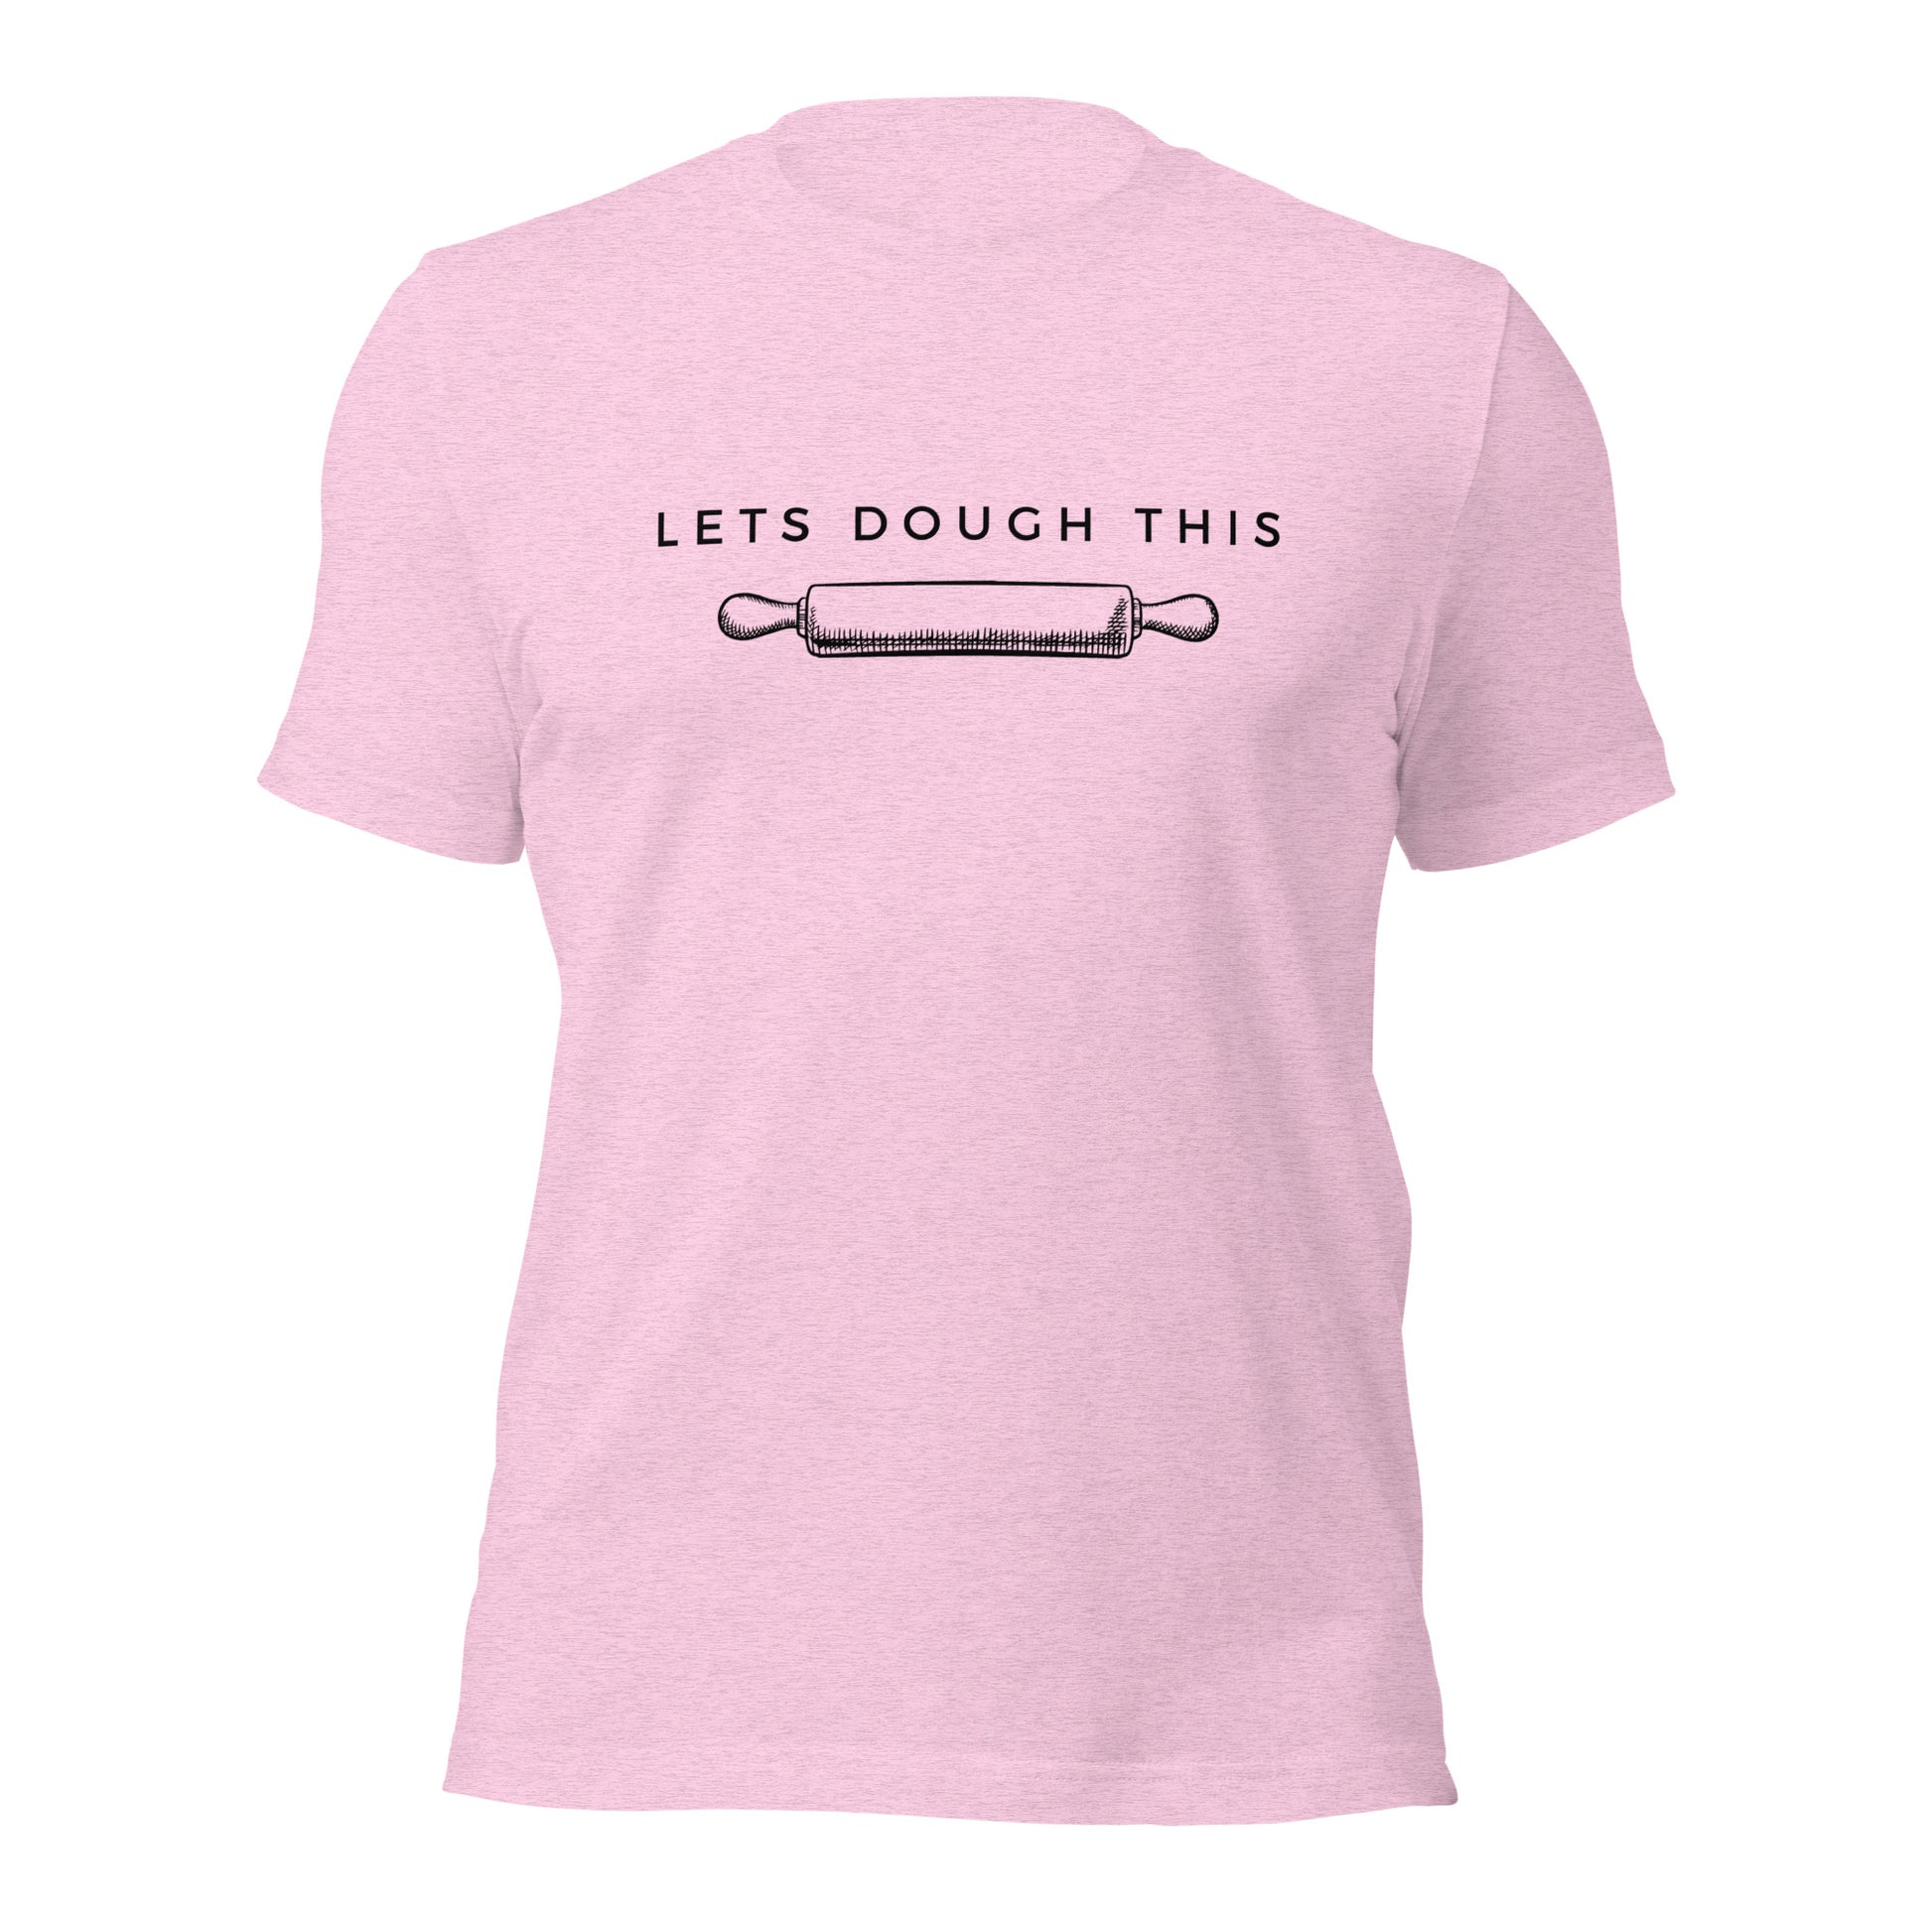 "Let’s Dough This" T-Shirt - Weave Got Gifts - Unique Gifts You Won’t Find Anywhere Else!